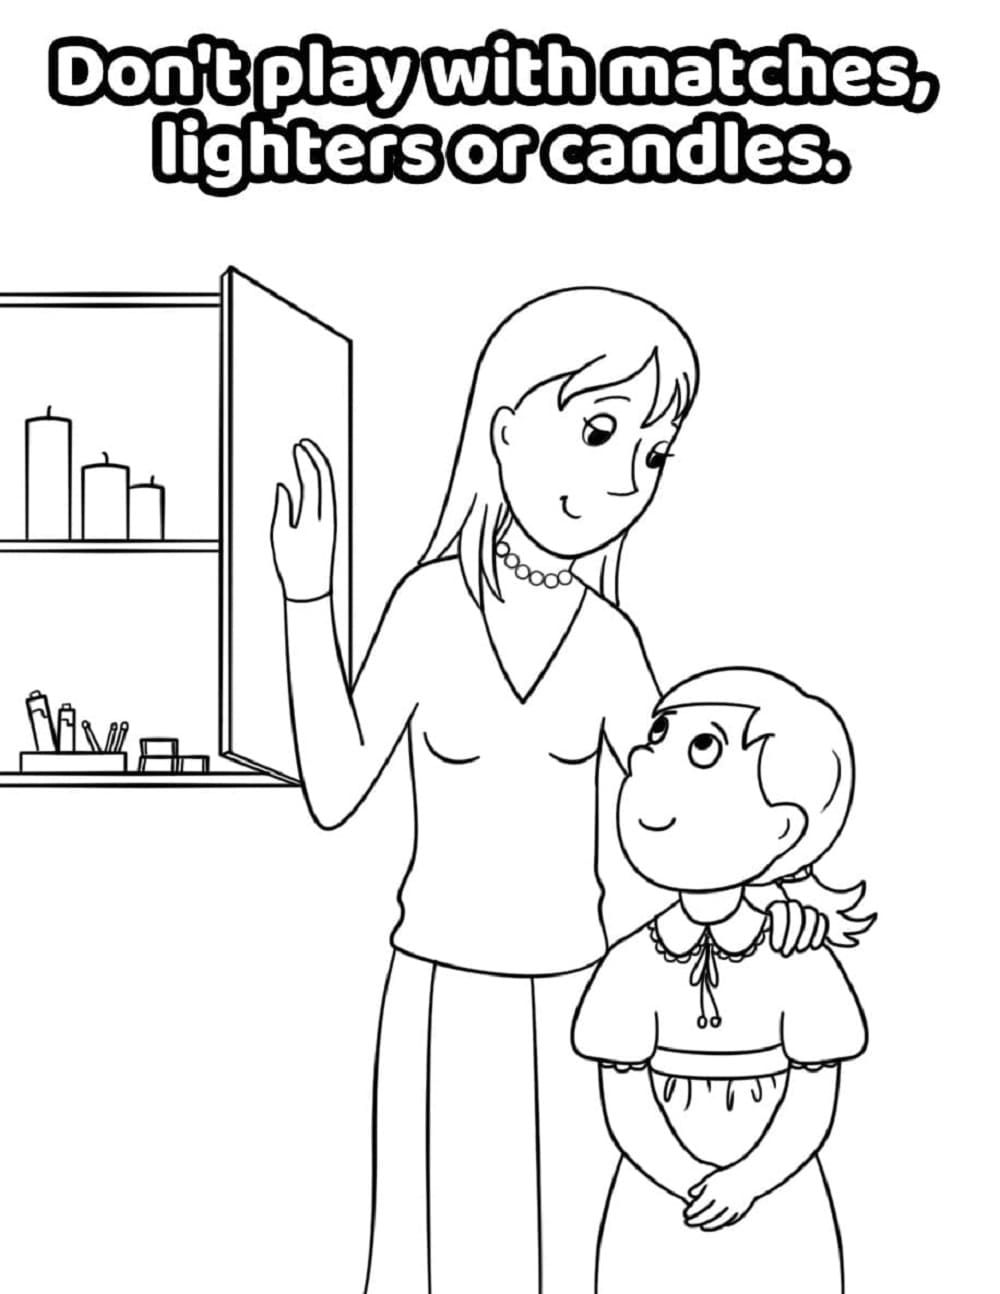 Printable Fire Safety Don’t Play with Matches Coloring Page